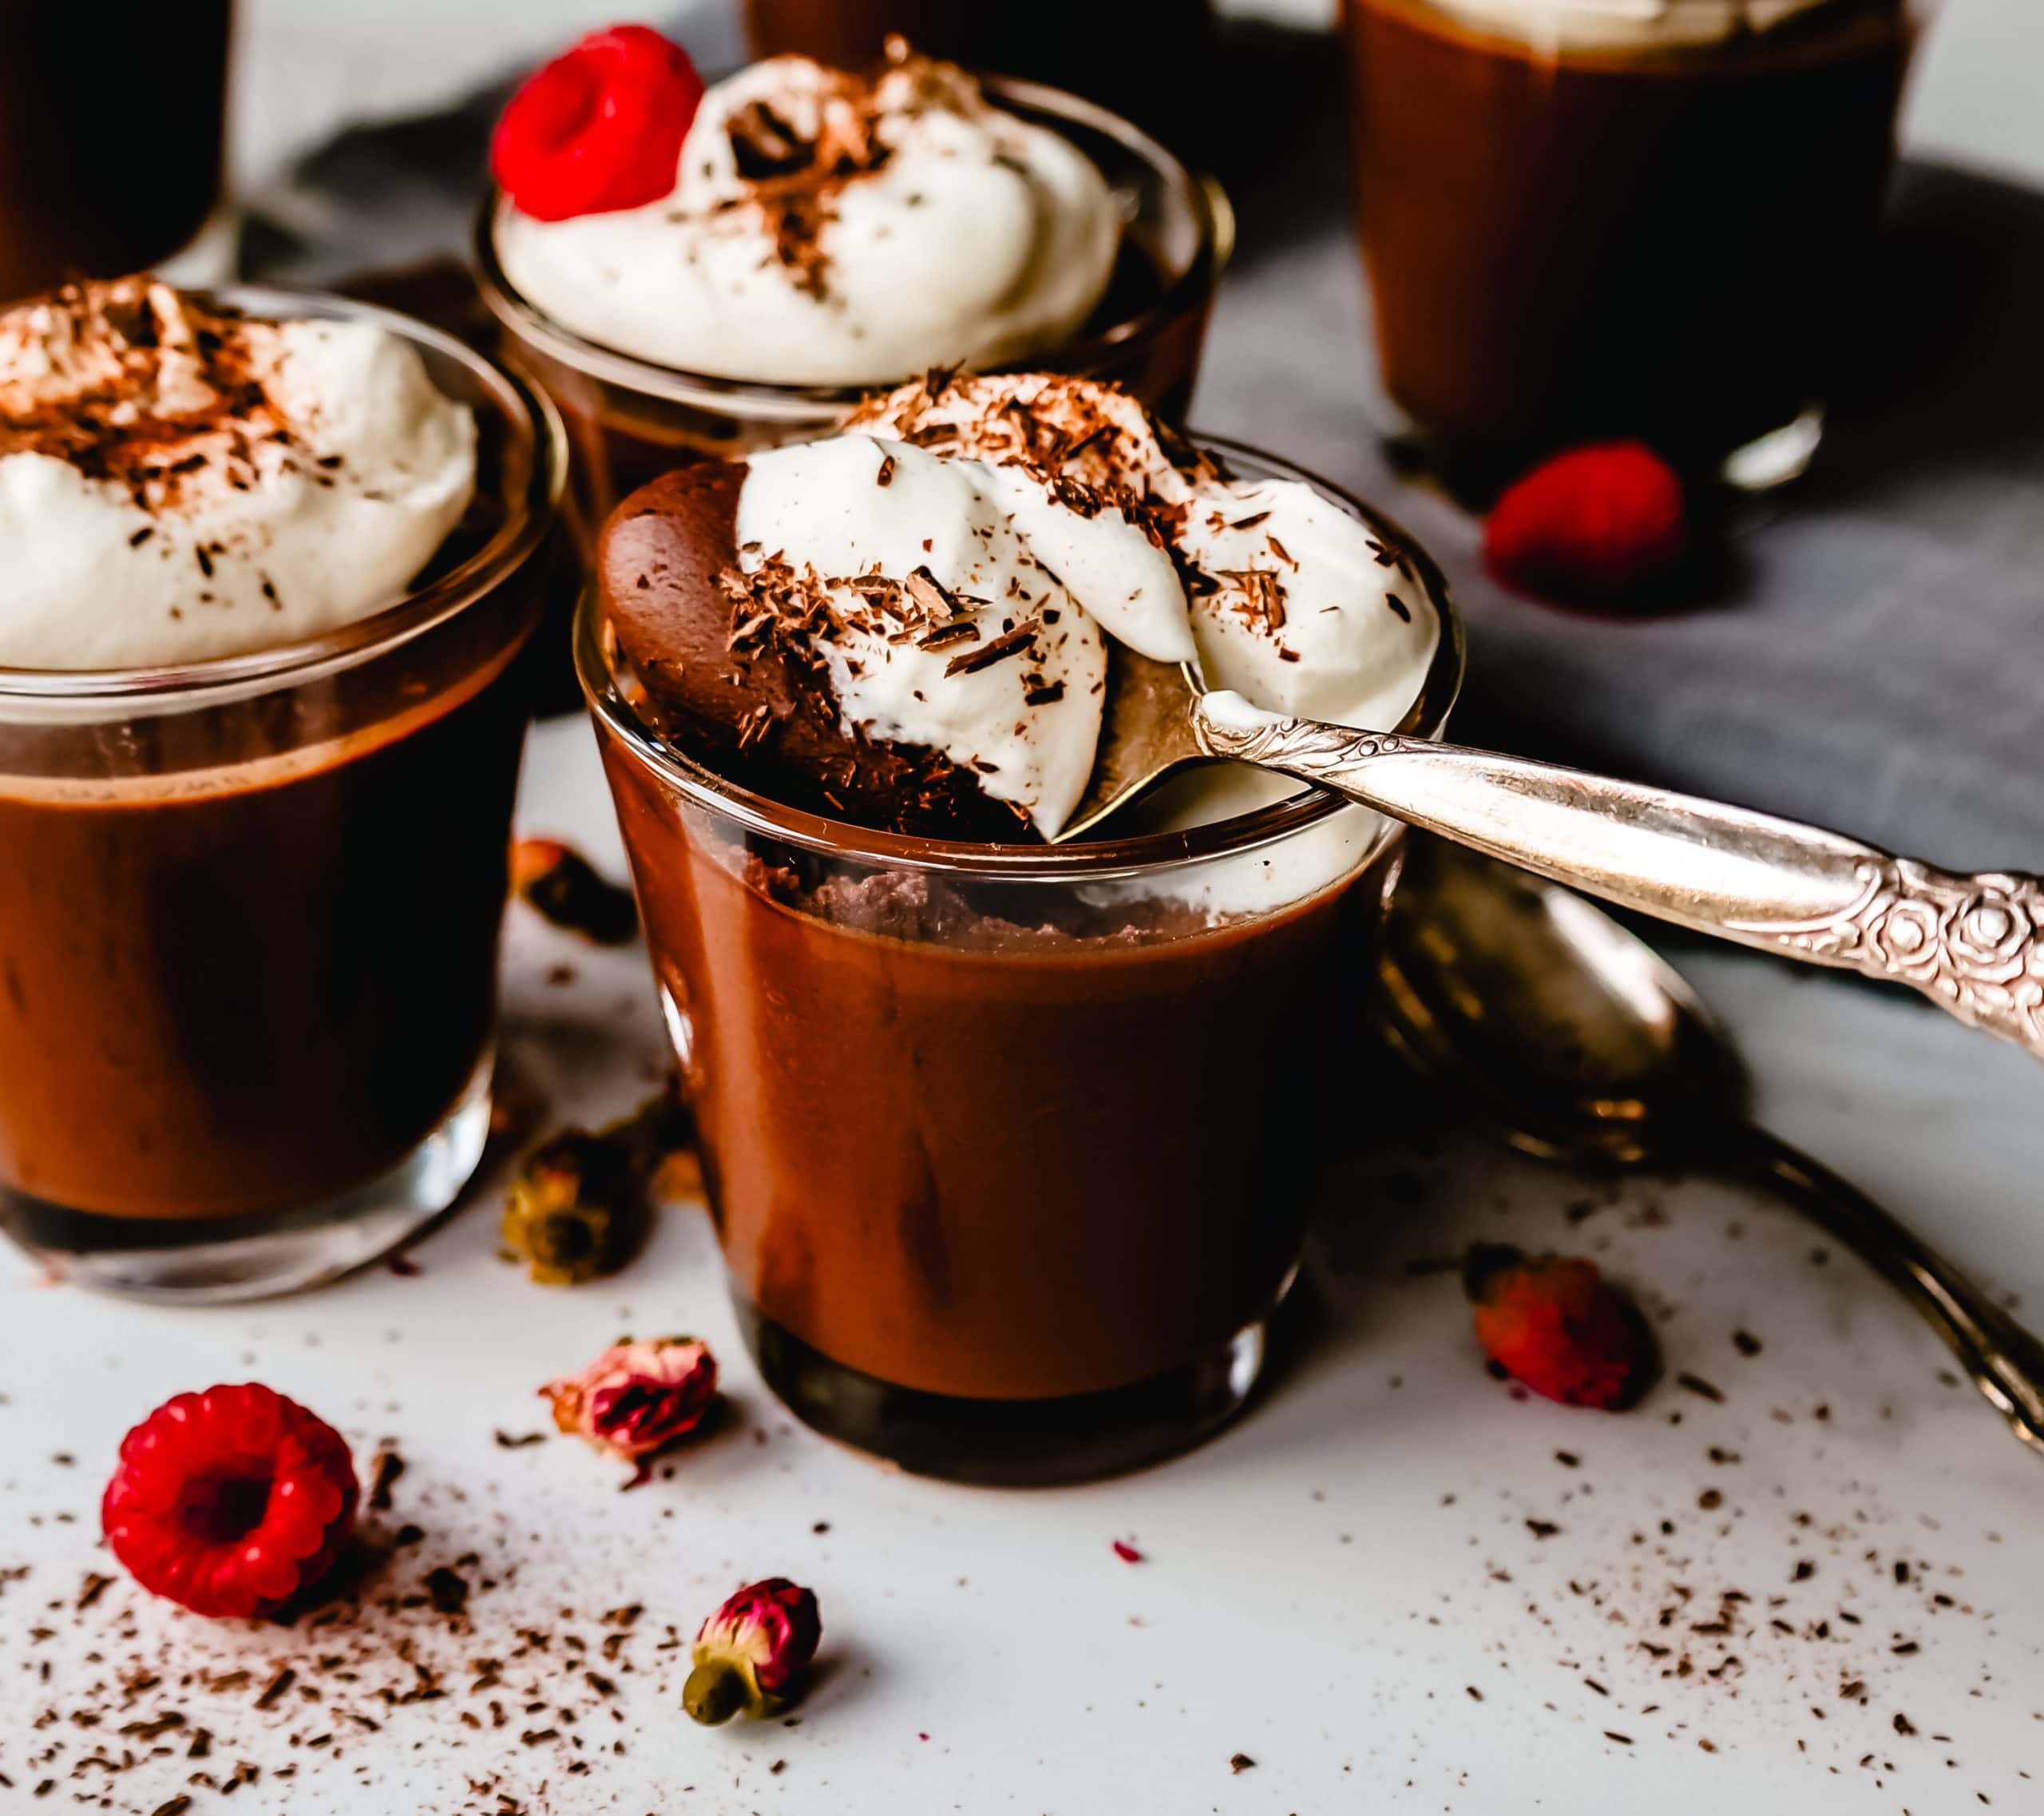 Chocolate Pot de Creme. Rich velvety smooth chocolate custard topped with fresh whipped cream. A pot of cream made with melted chocolate, heavy cream, sugar, and egg yolks. A decadent chocolate dessert!